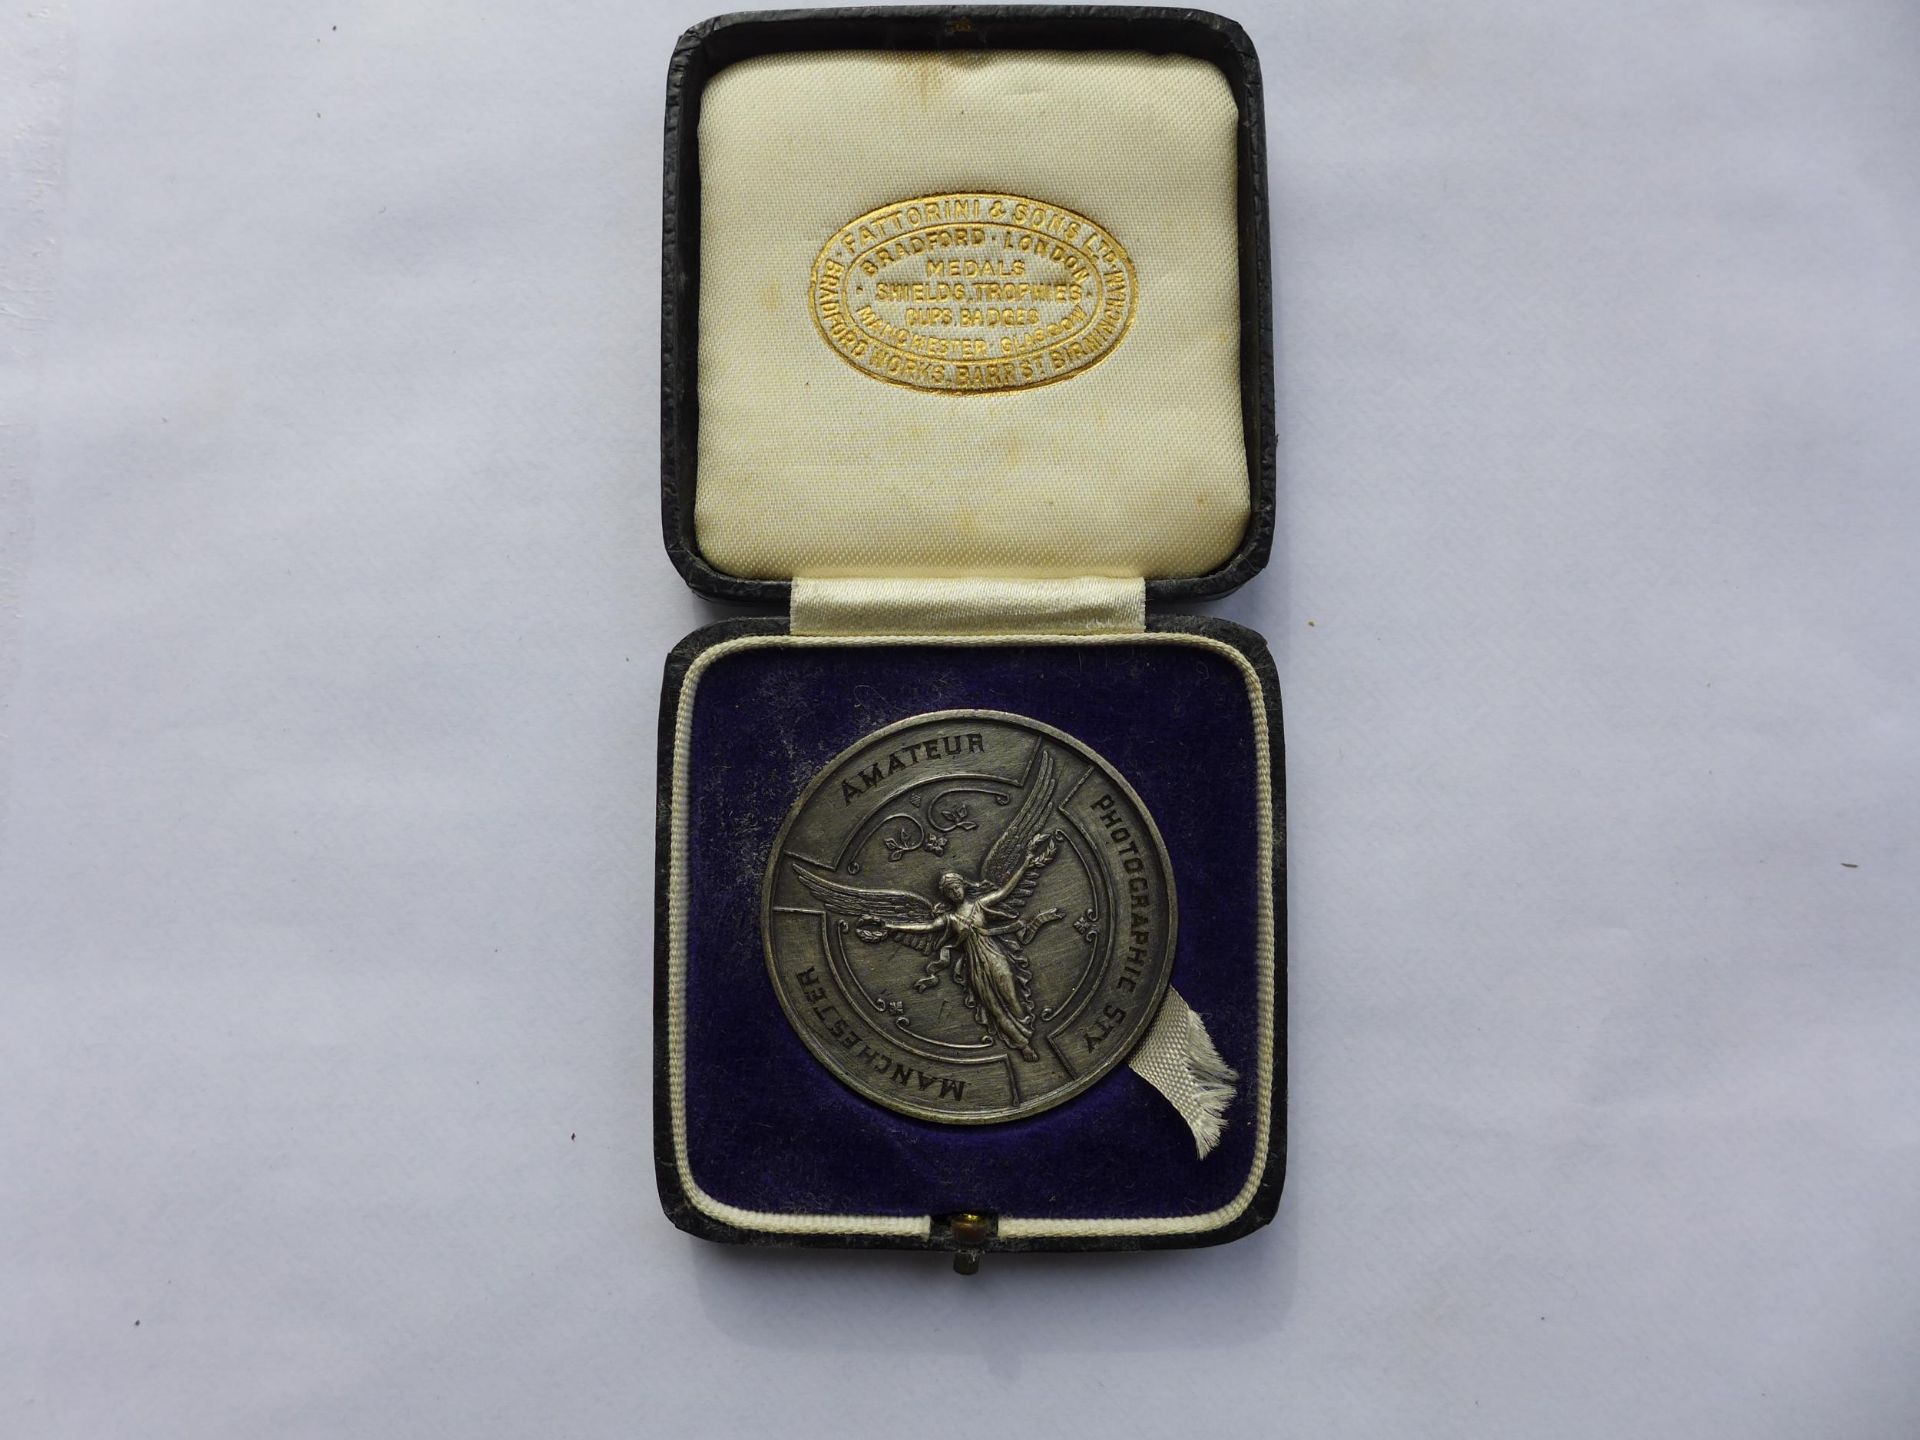 A CASED MANCHESTER AMATEUR PHOTOGRAPHY PRIZE MEDAL AWARDED TO C.ARMSTRONG 1943, 45MM, BY FATTORINI